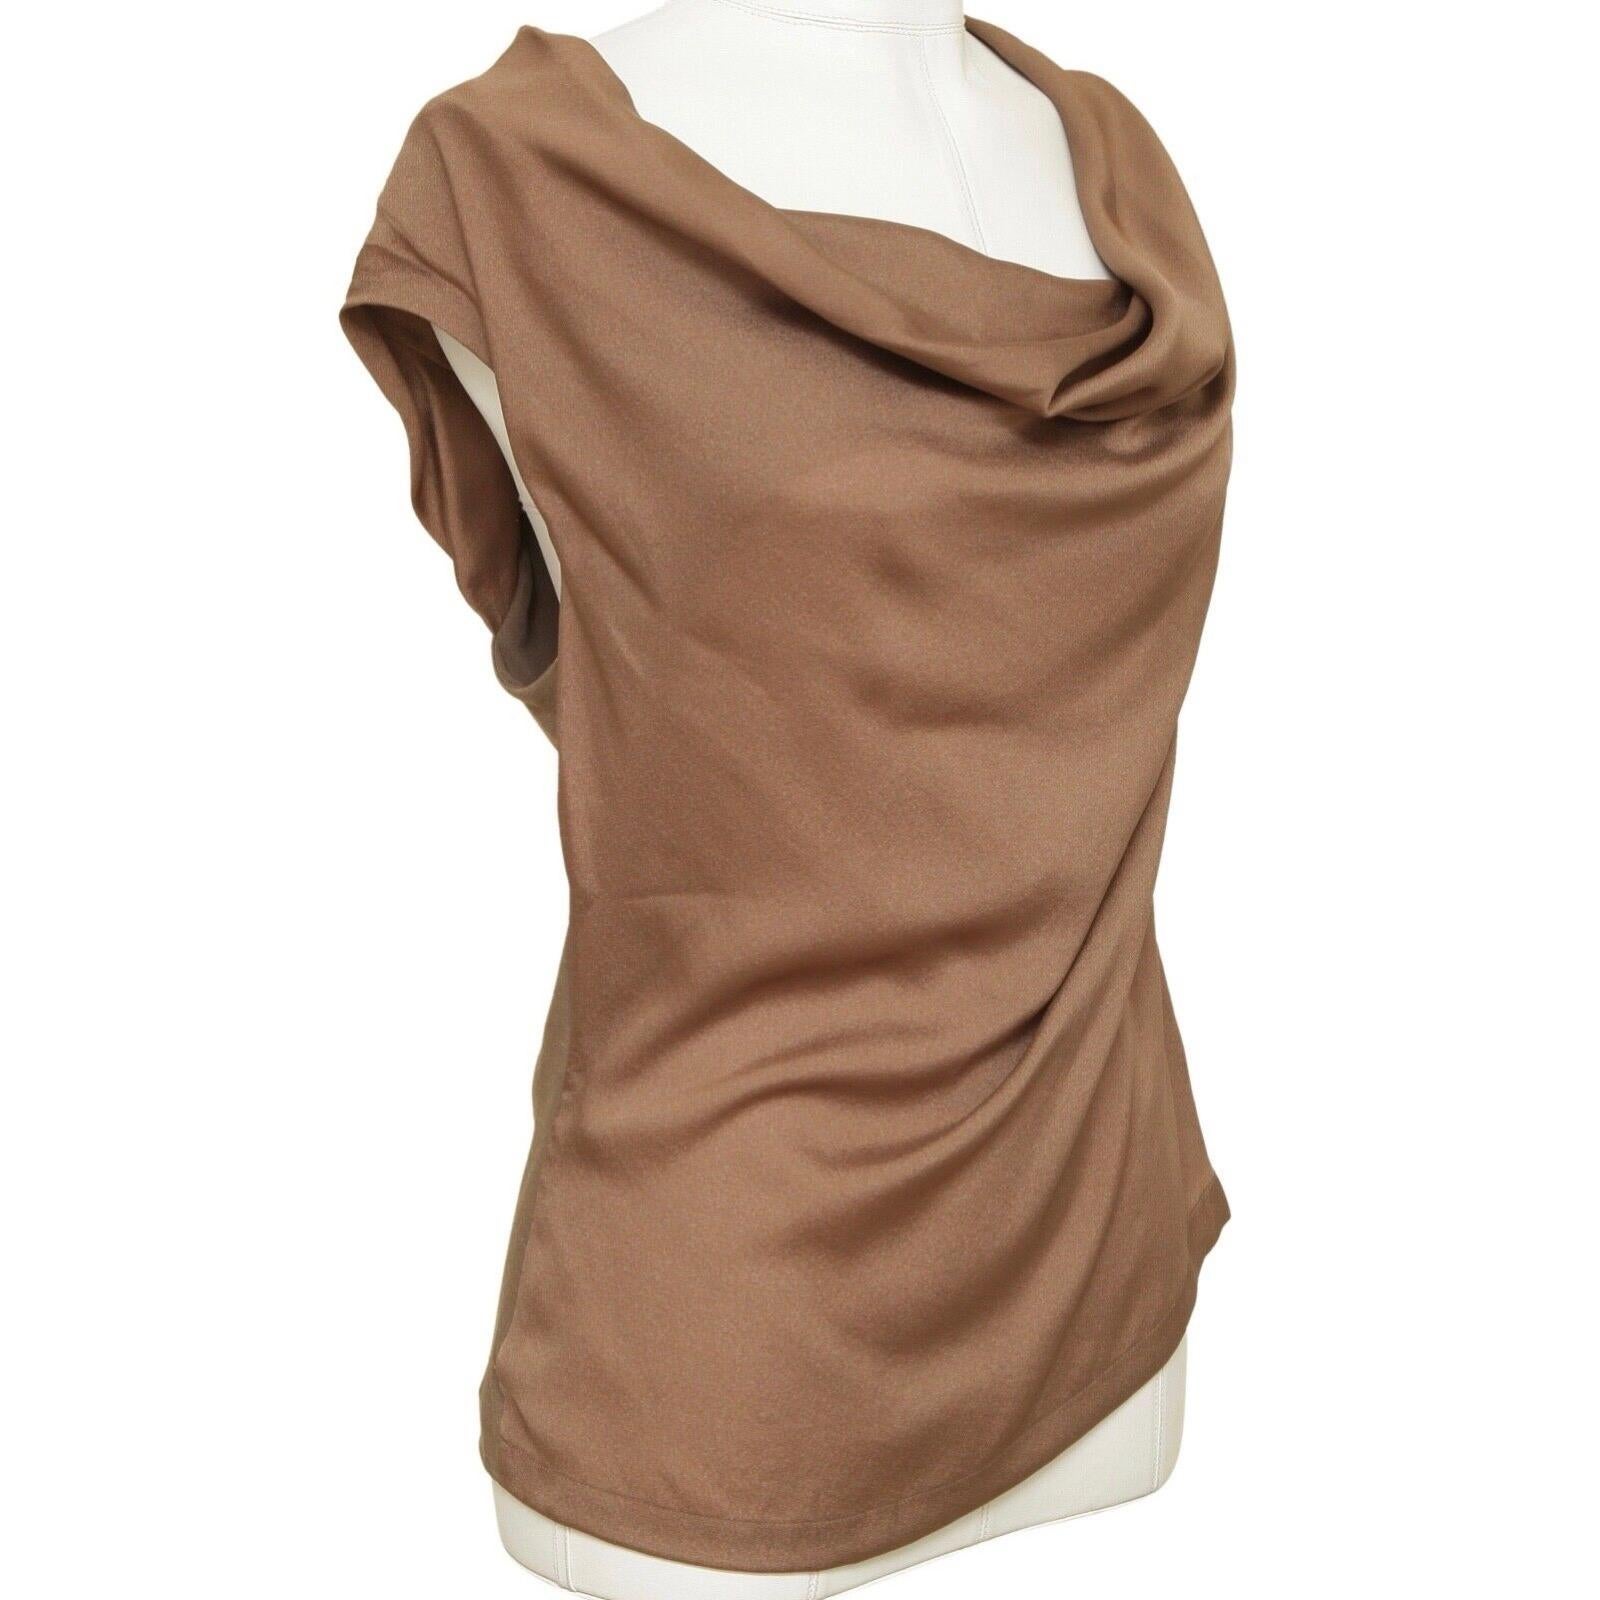 GUARANTEED AUTHENTIC ESCADA BROWN (TOBACCO) SILK BLEND TOP

Retail excluding sales tax $525

Design:
- Comfortable to wear asymmetrical fit cowl neck blouse.
- Cap sleeve.
- Silk front, wool/polyamide v-neck backside.
- Slip on.
- Beautiful,